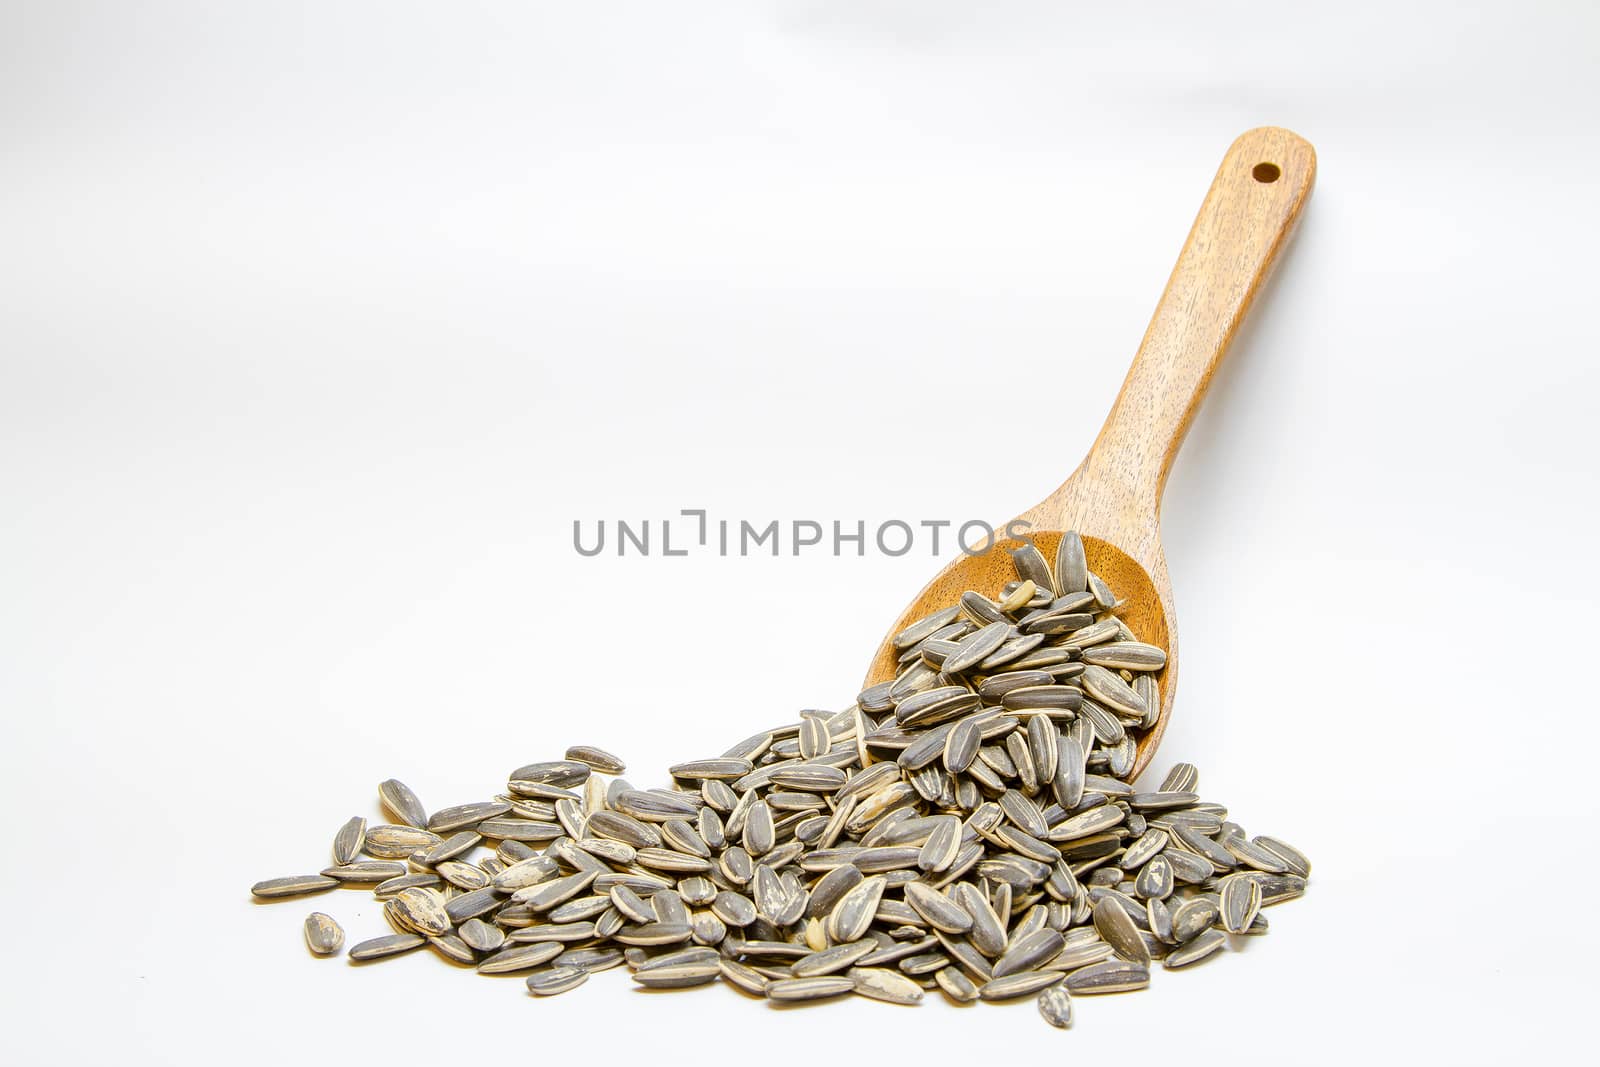 Dried sunflower seeds in the wooden spoon on white background.